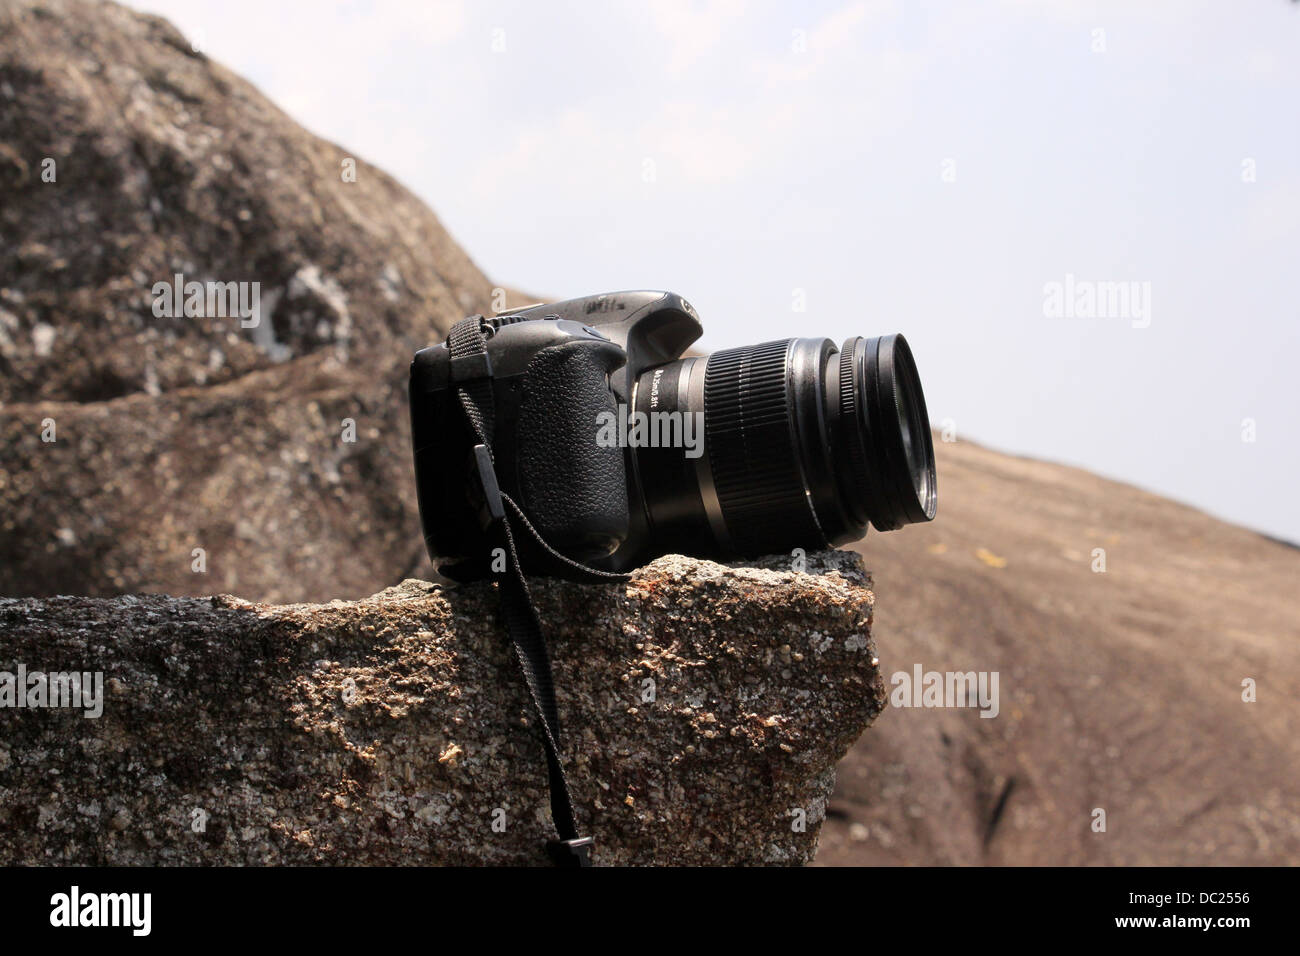 Canon EOS 550D or Rebel T2i  camera placed on a rock Stock Photo